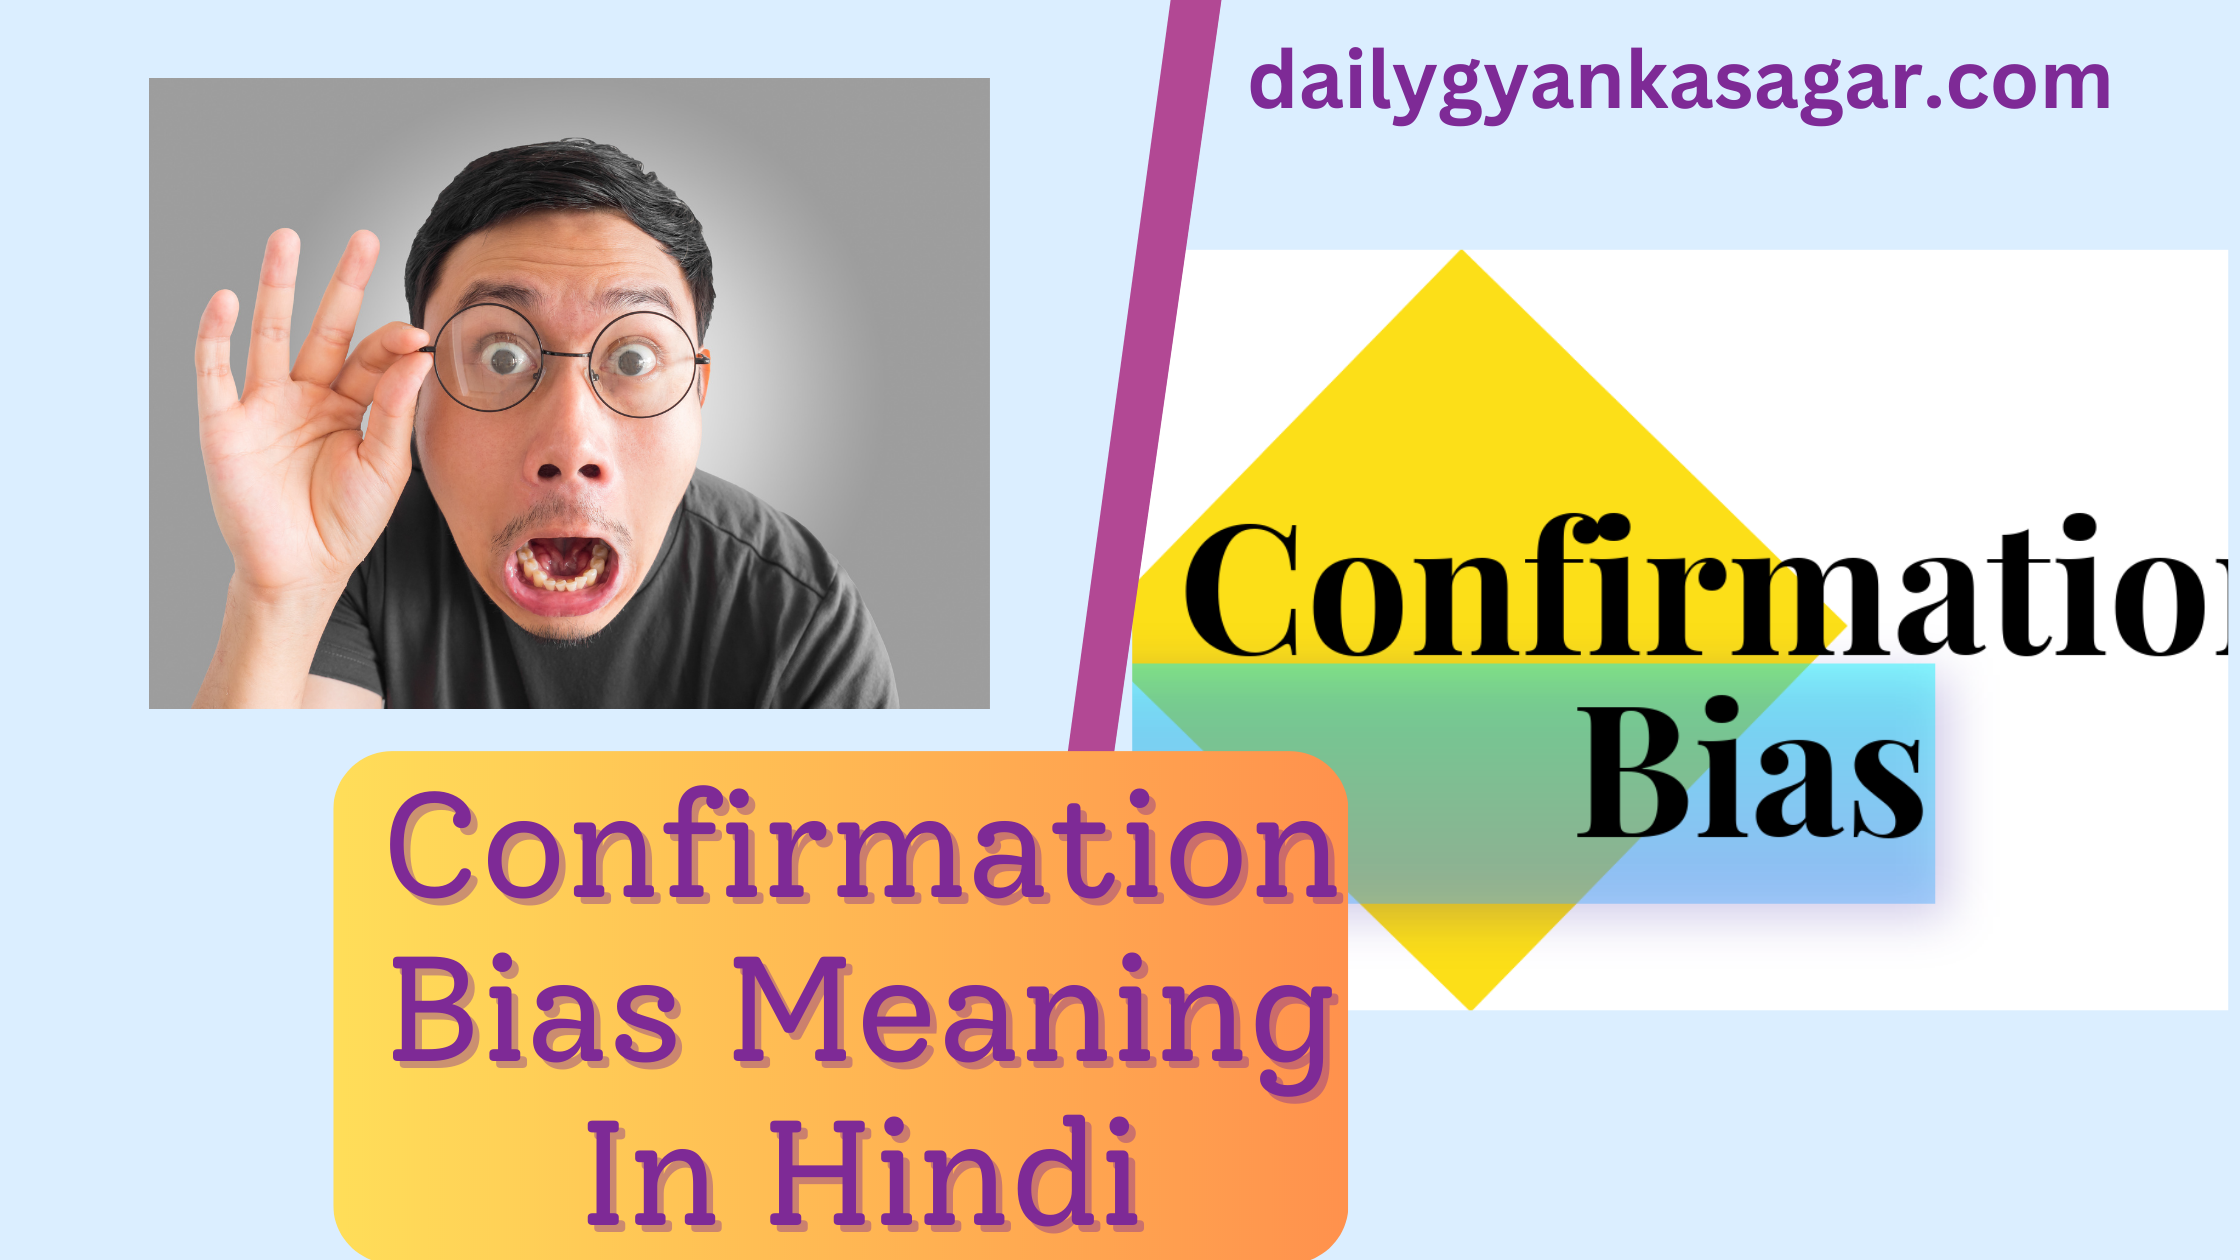 Confirmation Bias Meaning In Hindi